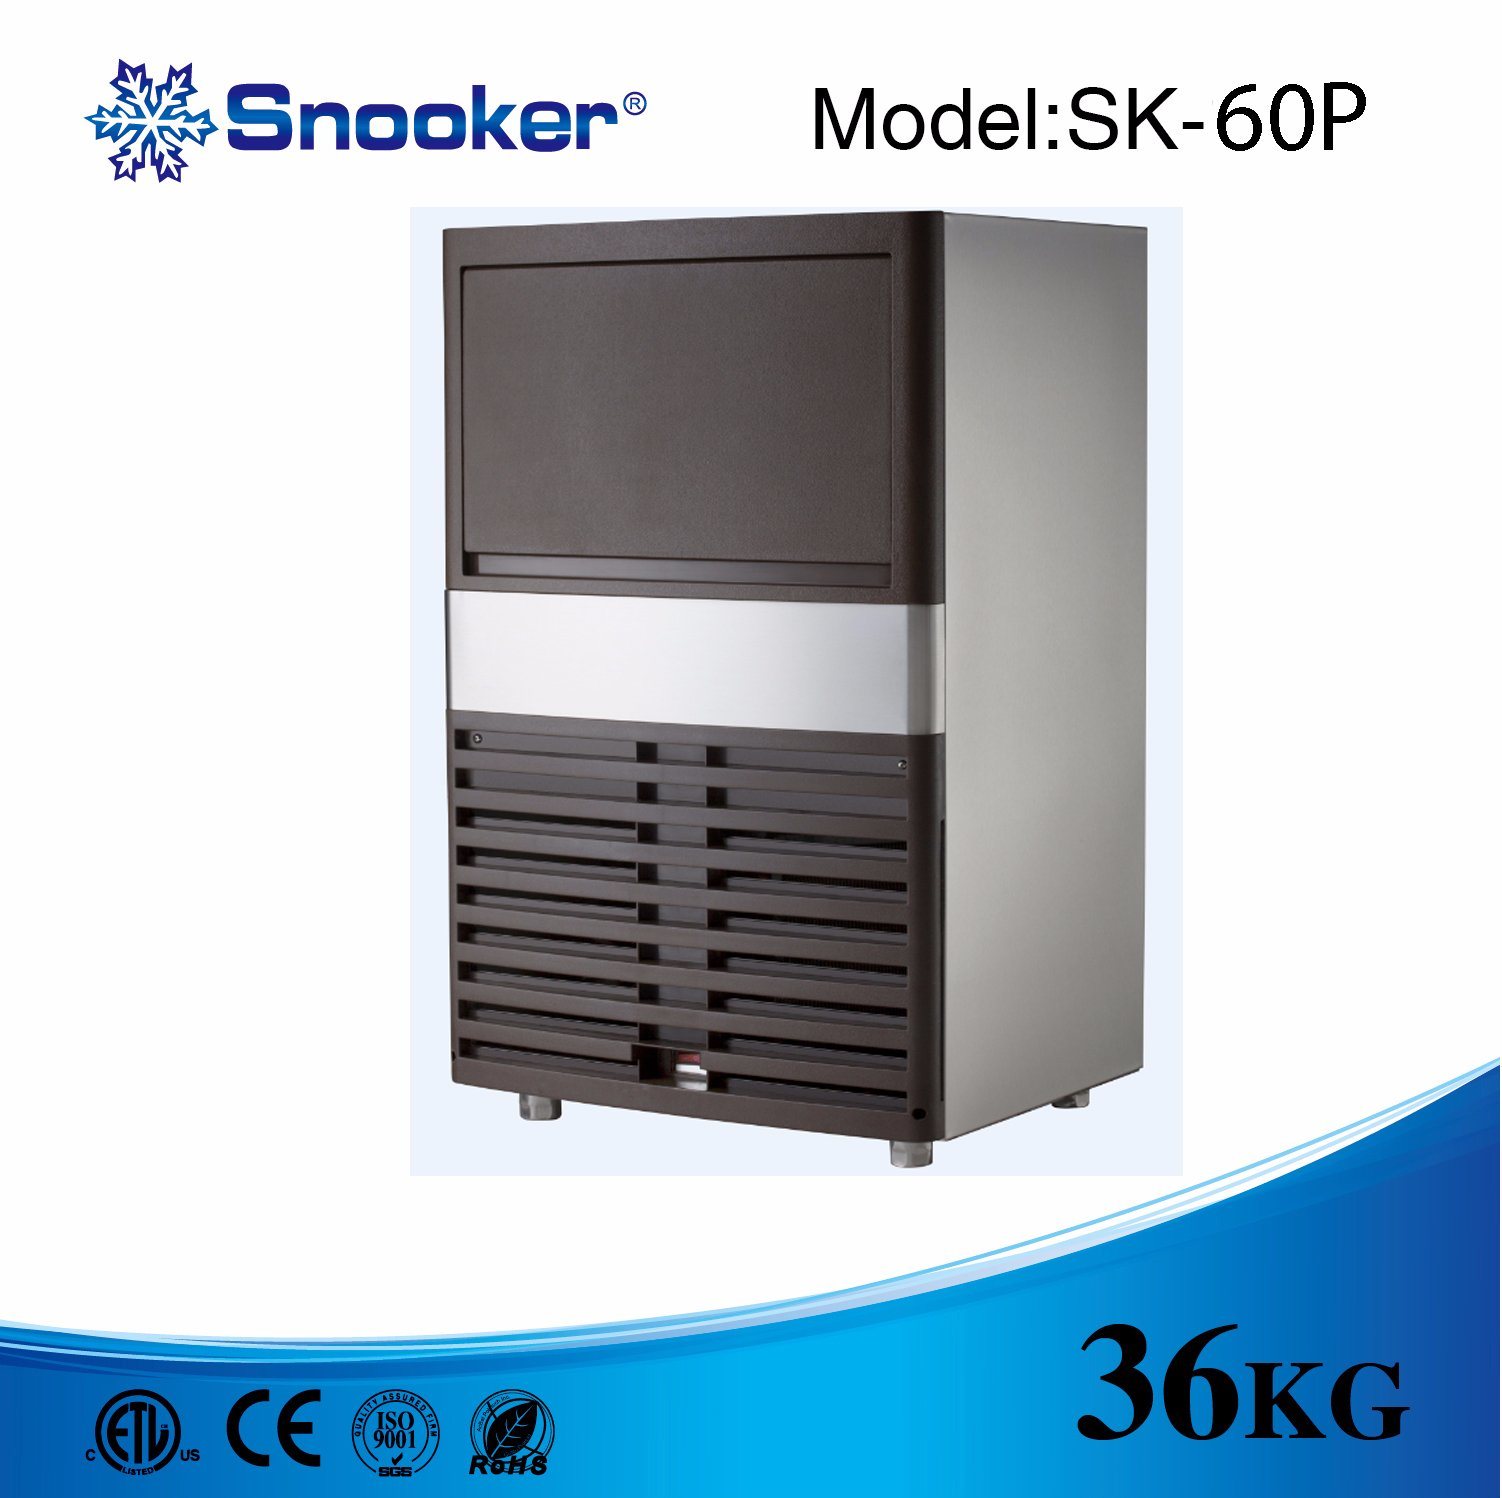 Snooker Sk60p Business Use Integral 26kg/ 24 Production Ice Machine